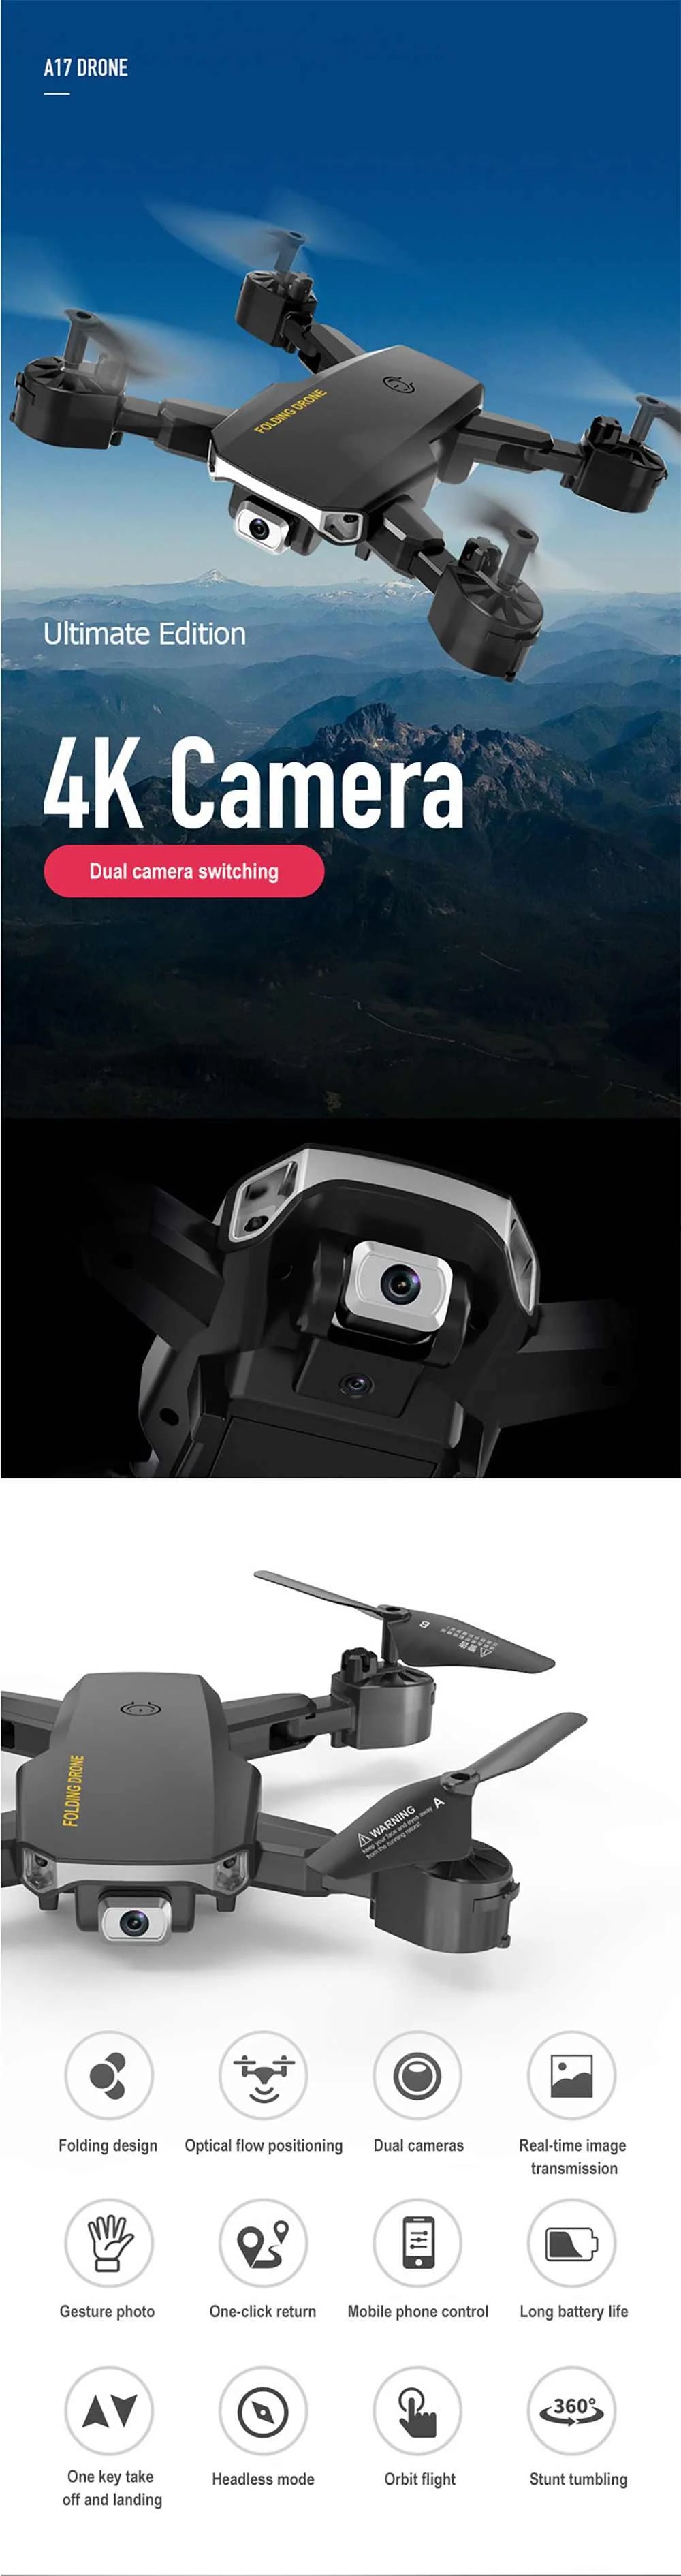 Eachine S60 Mini Drone, drone ultimate edition 4k camera dual camera switching folding design optical flow positioning